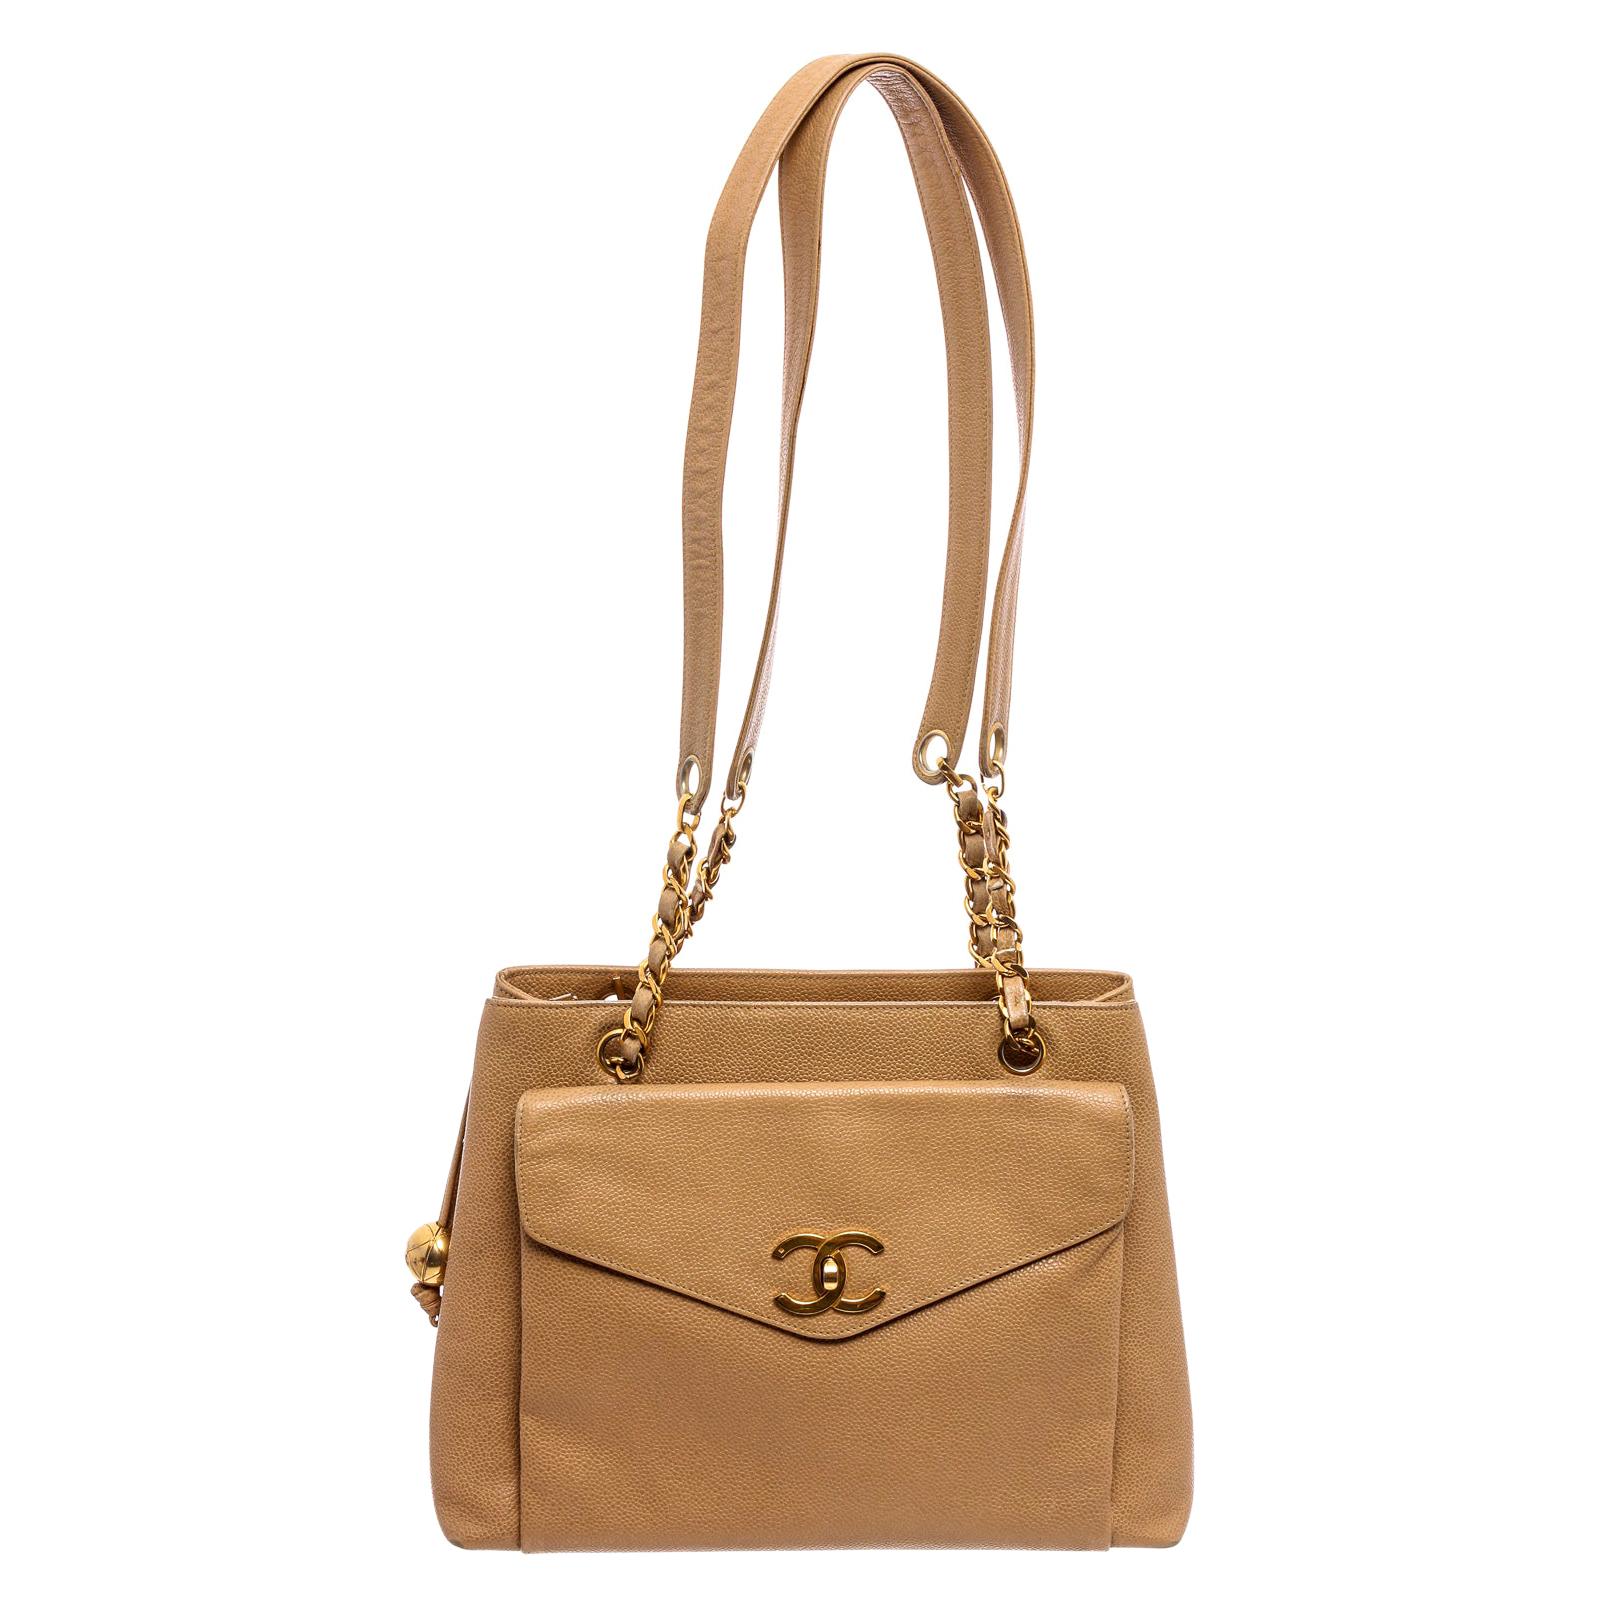 Chanel Beige Caviar Leather Front Pocket CC Chain Tote Bag